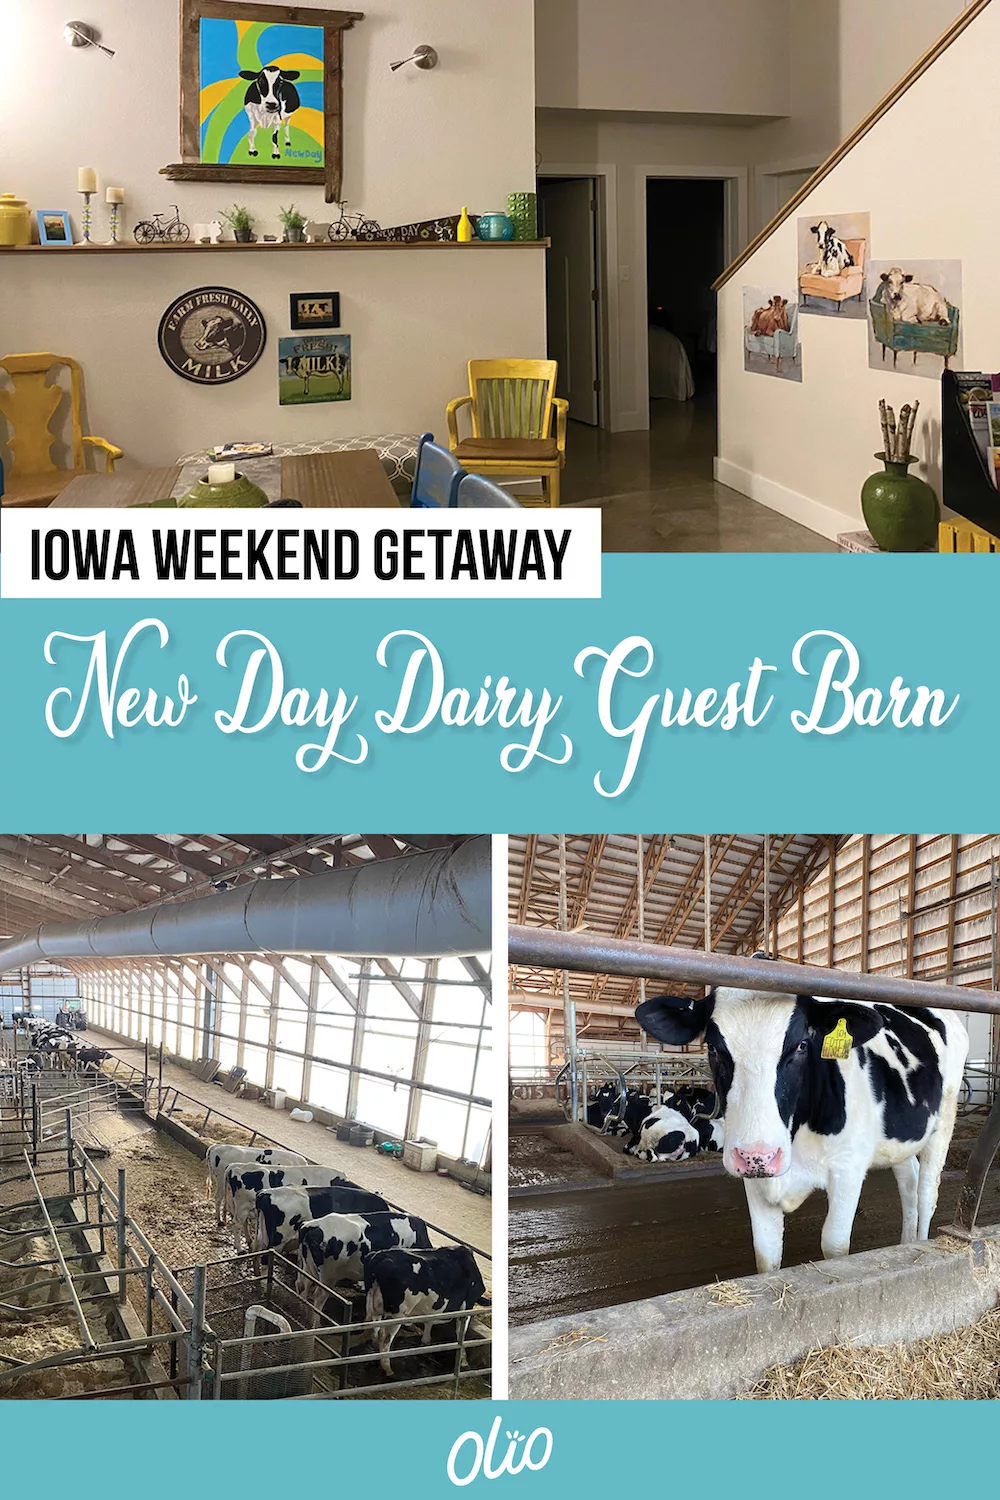 Looking for a unique Iowa weekend getaway? Plan a visit to the New Day Dairy Guest Barn in Clarksville, Iowa! This fun accommodation at a working dairy farm will give you the perfect place to relax while getting a behind-the-scenes look at what it takes to be a dairy farmer. #Iowa #Midwest #travel #MidwestGetaway